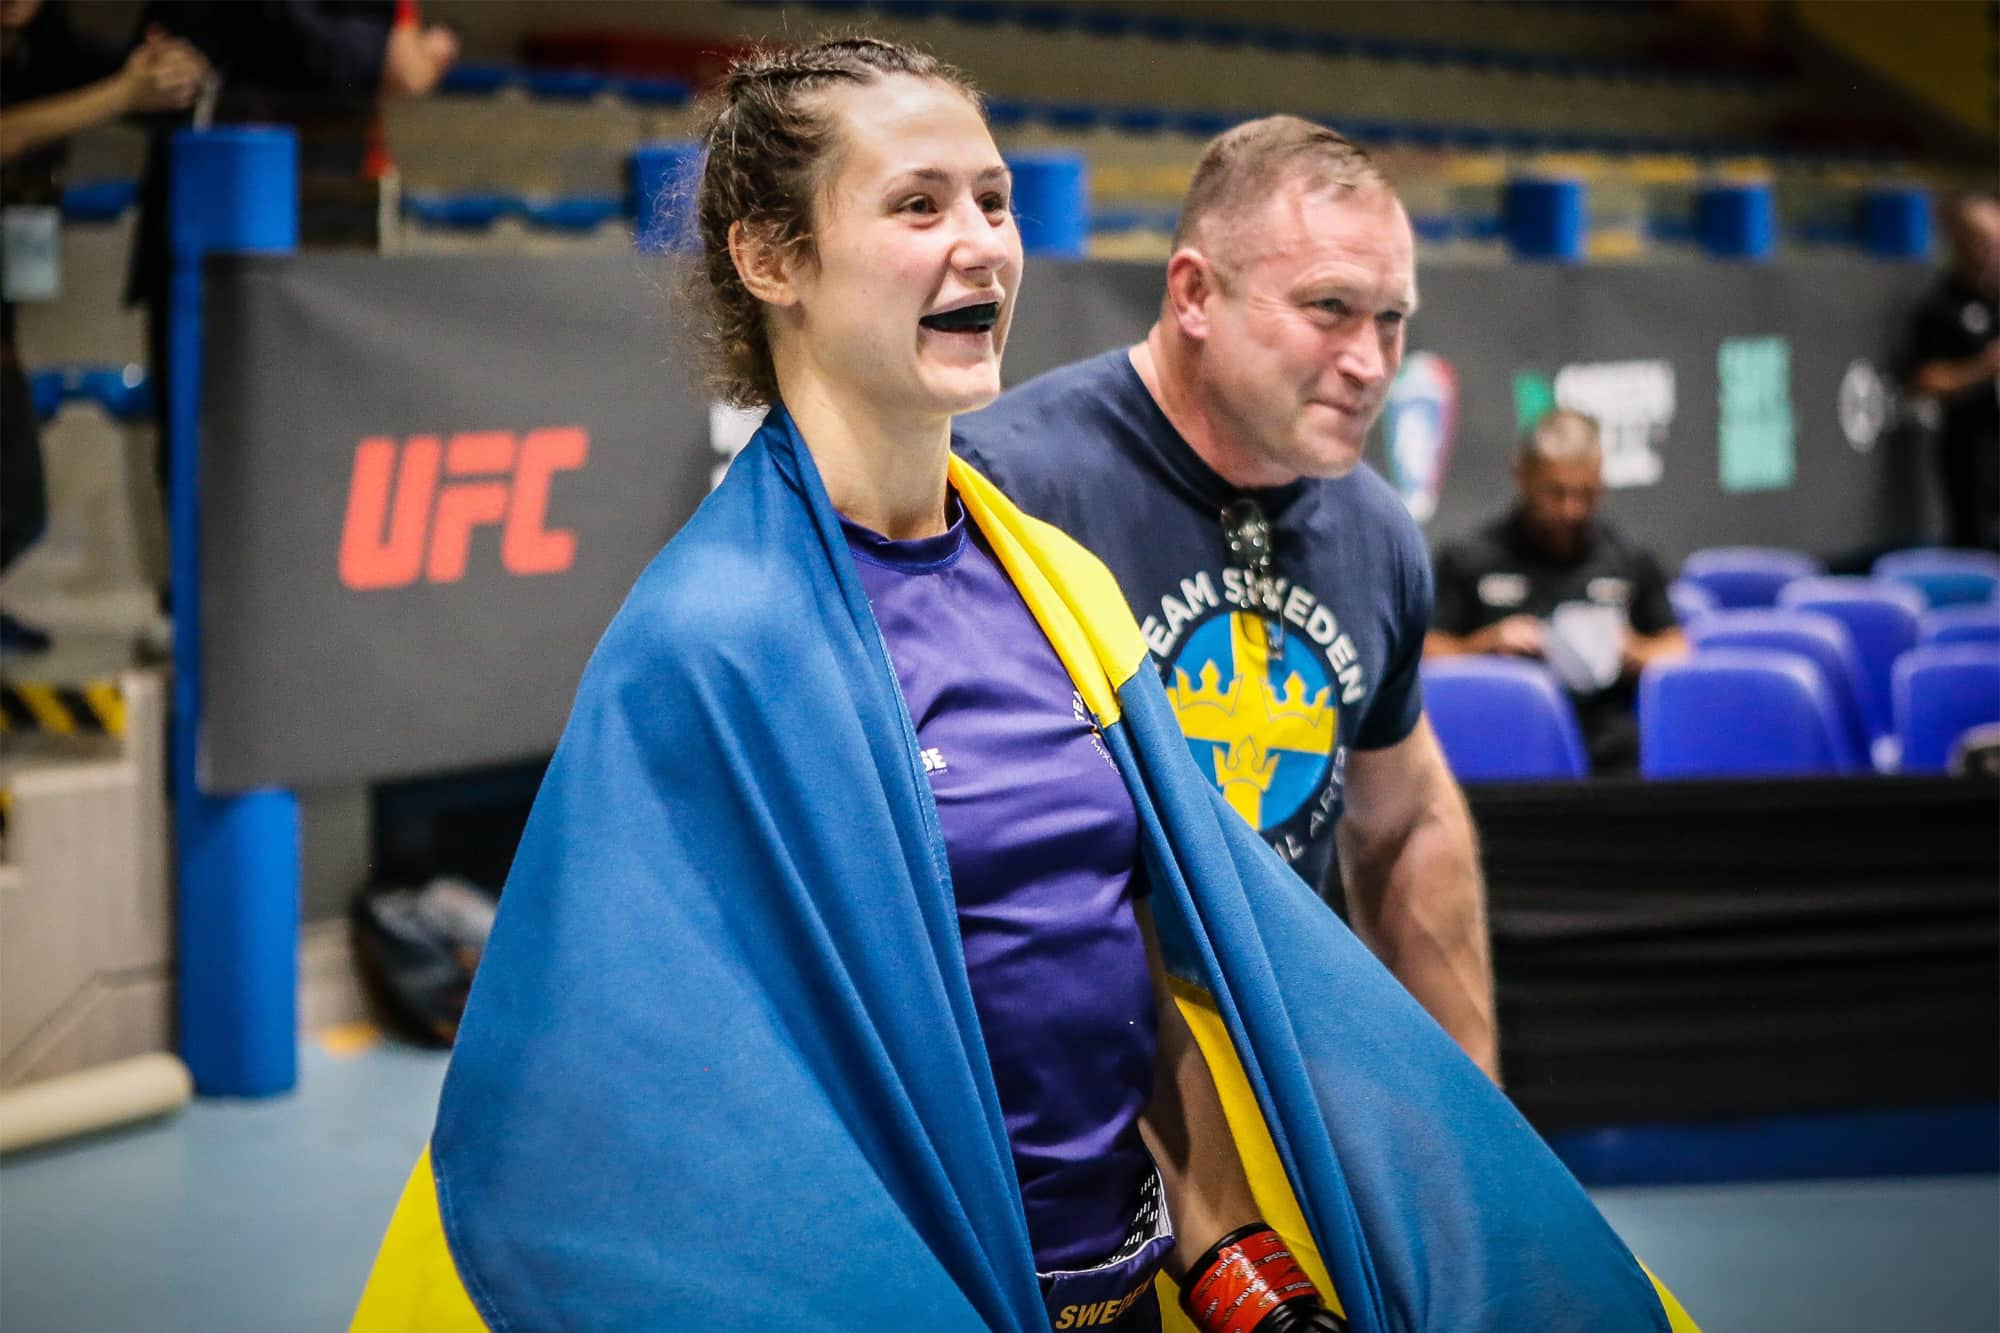 Nina Nikolija Milosevic has been cleared to represent Serbia at the 2022 IMMAF World Championships ©IMMAF